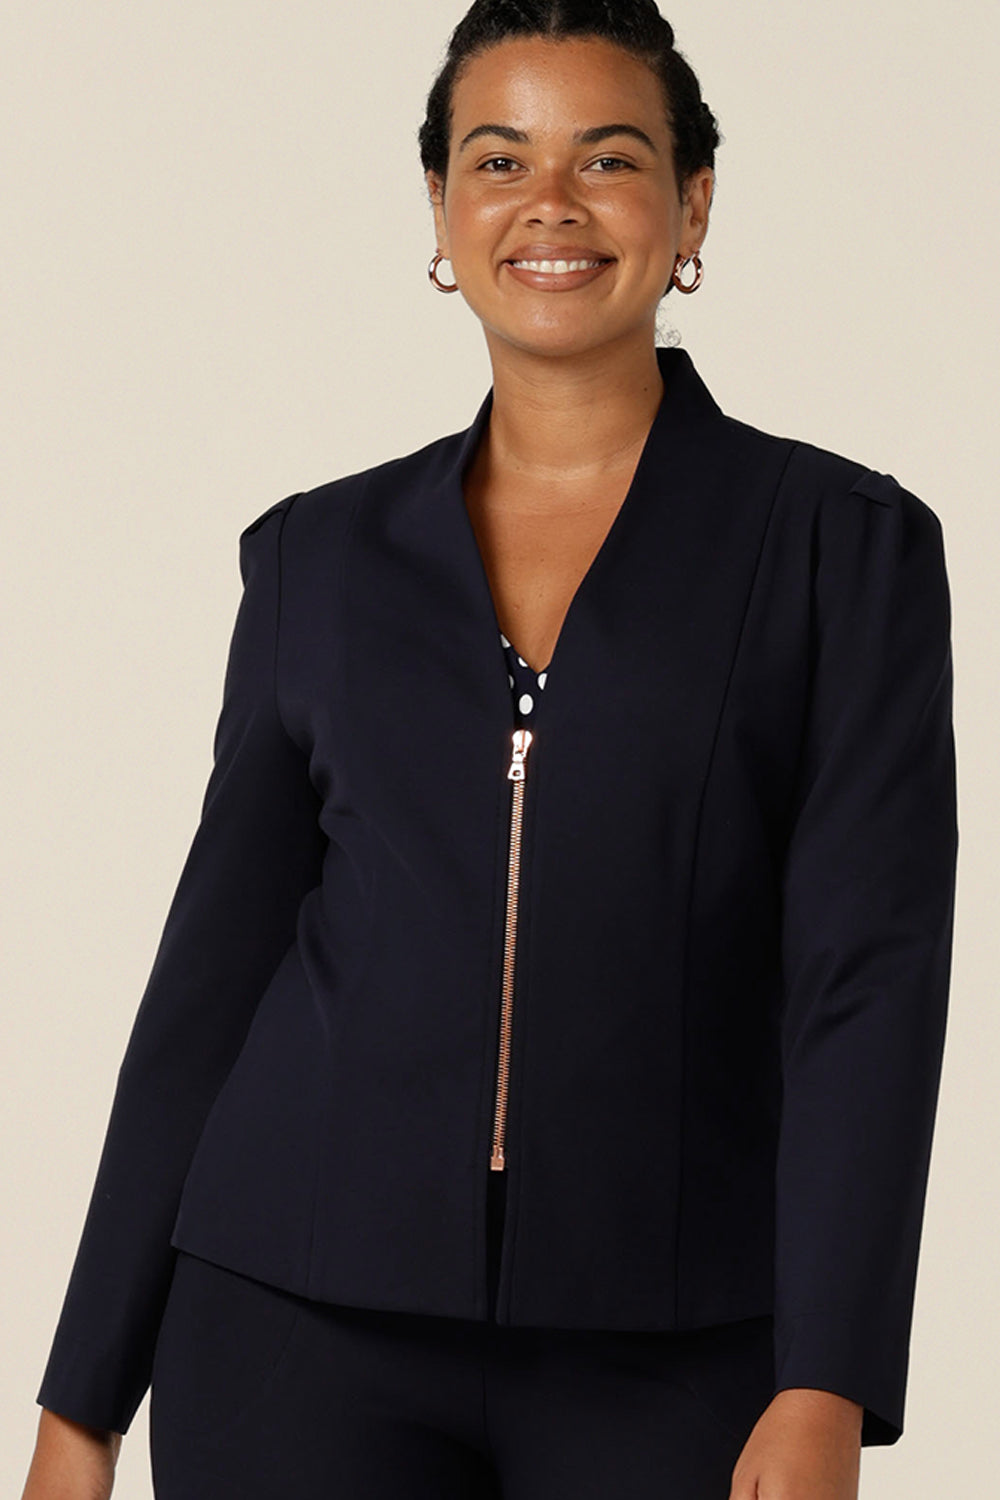 Shop this modern corporate women's jacket online. A collarless, navy blue, tailored jacket with full length sleeves, a rose gold zip fastening is made in Australia by women's clothing label, Leina & Fleur.